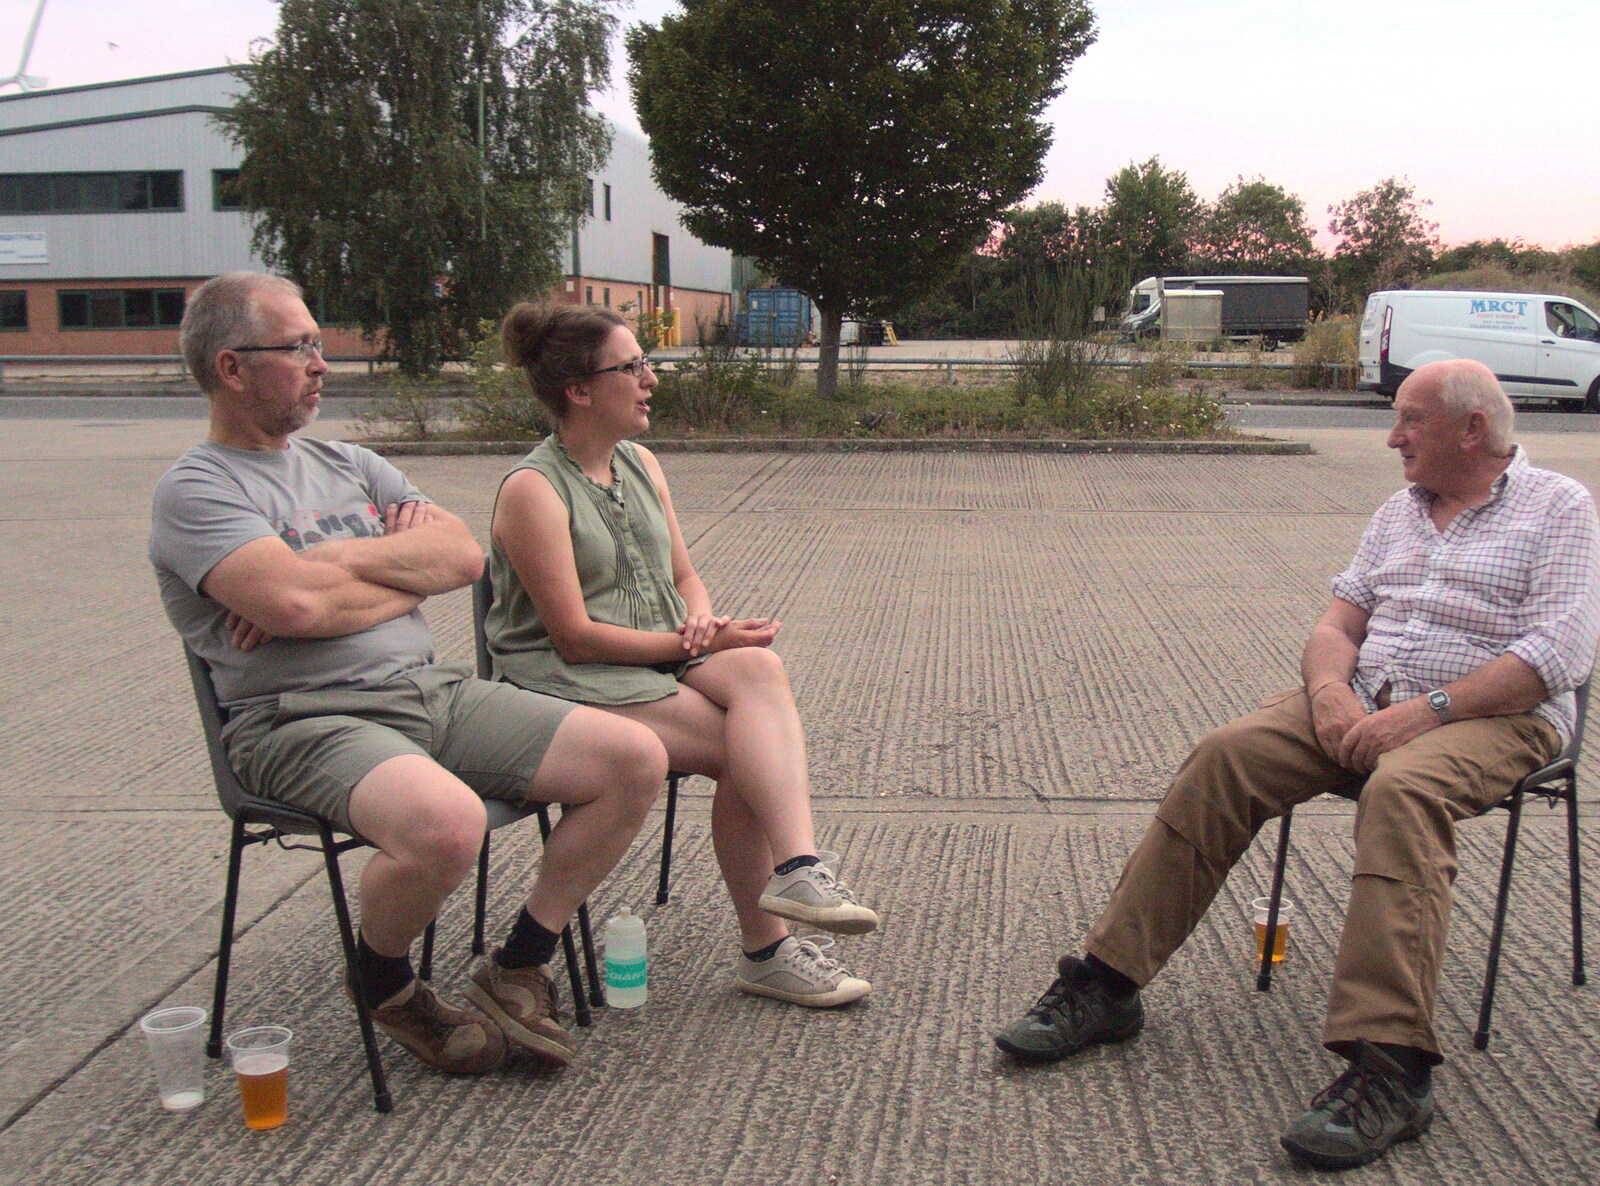 More conversation on the concrete car park from More Bike Rides, and Marc's Birthday, Brome, Suffolk - 21st August 2020